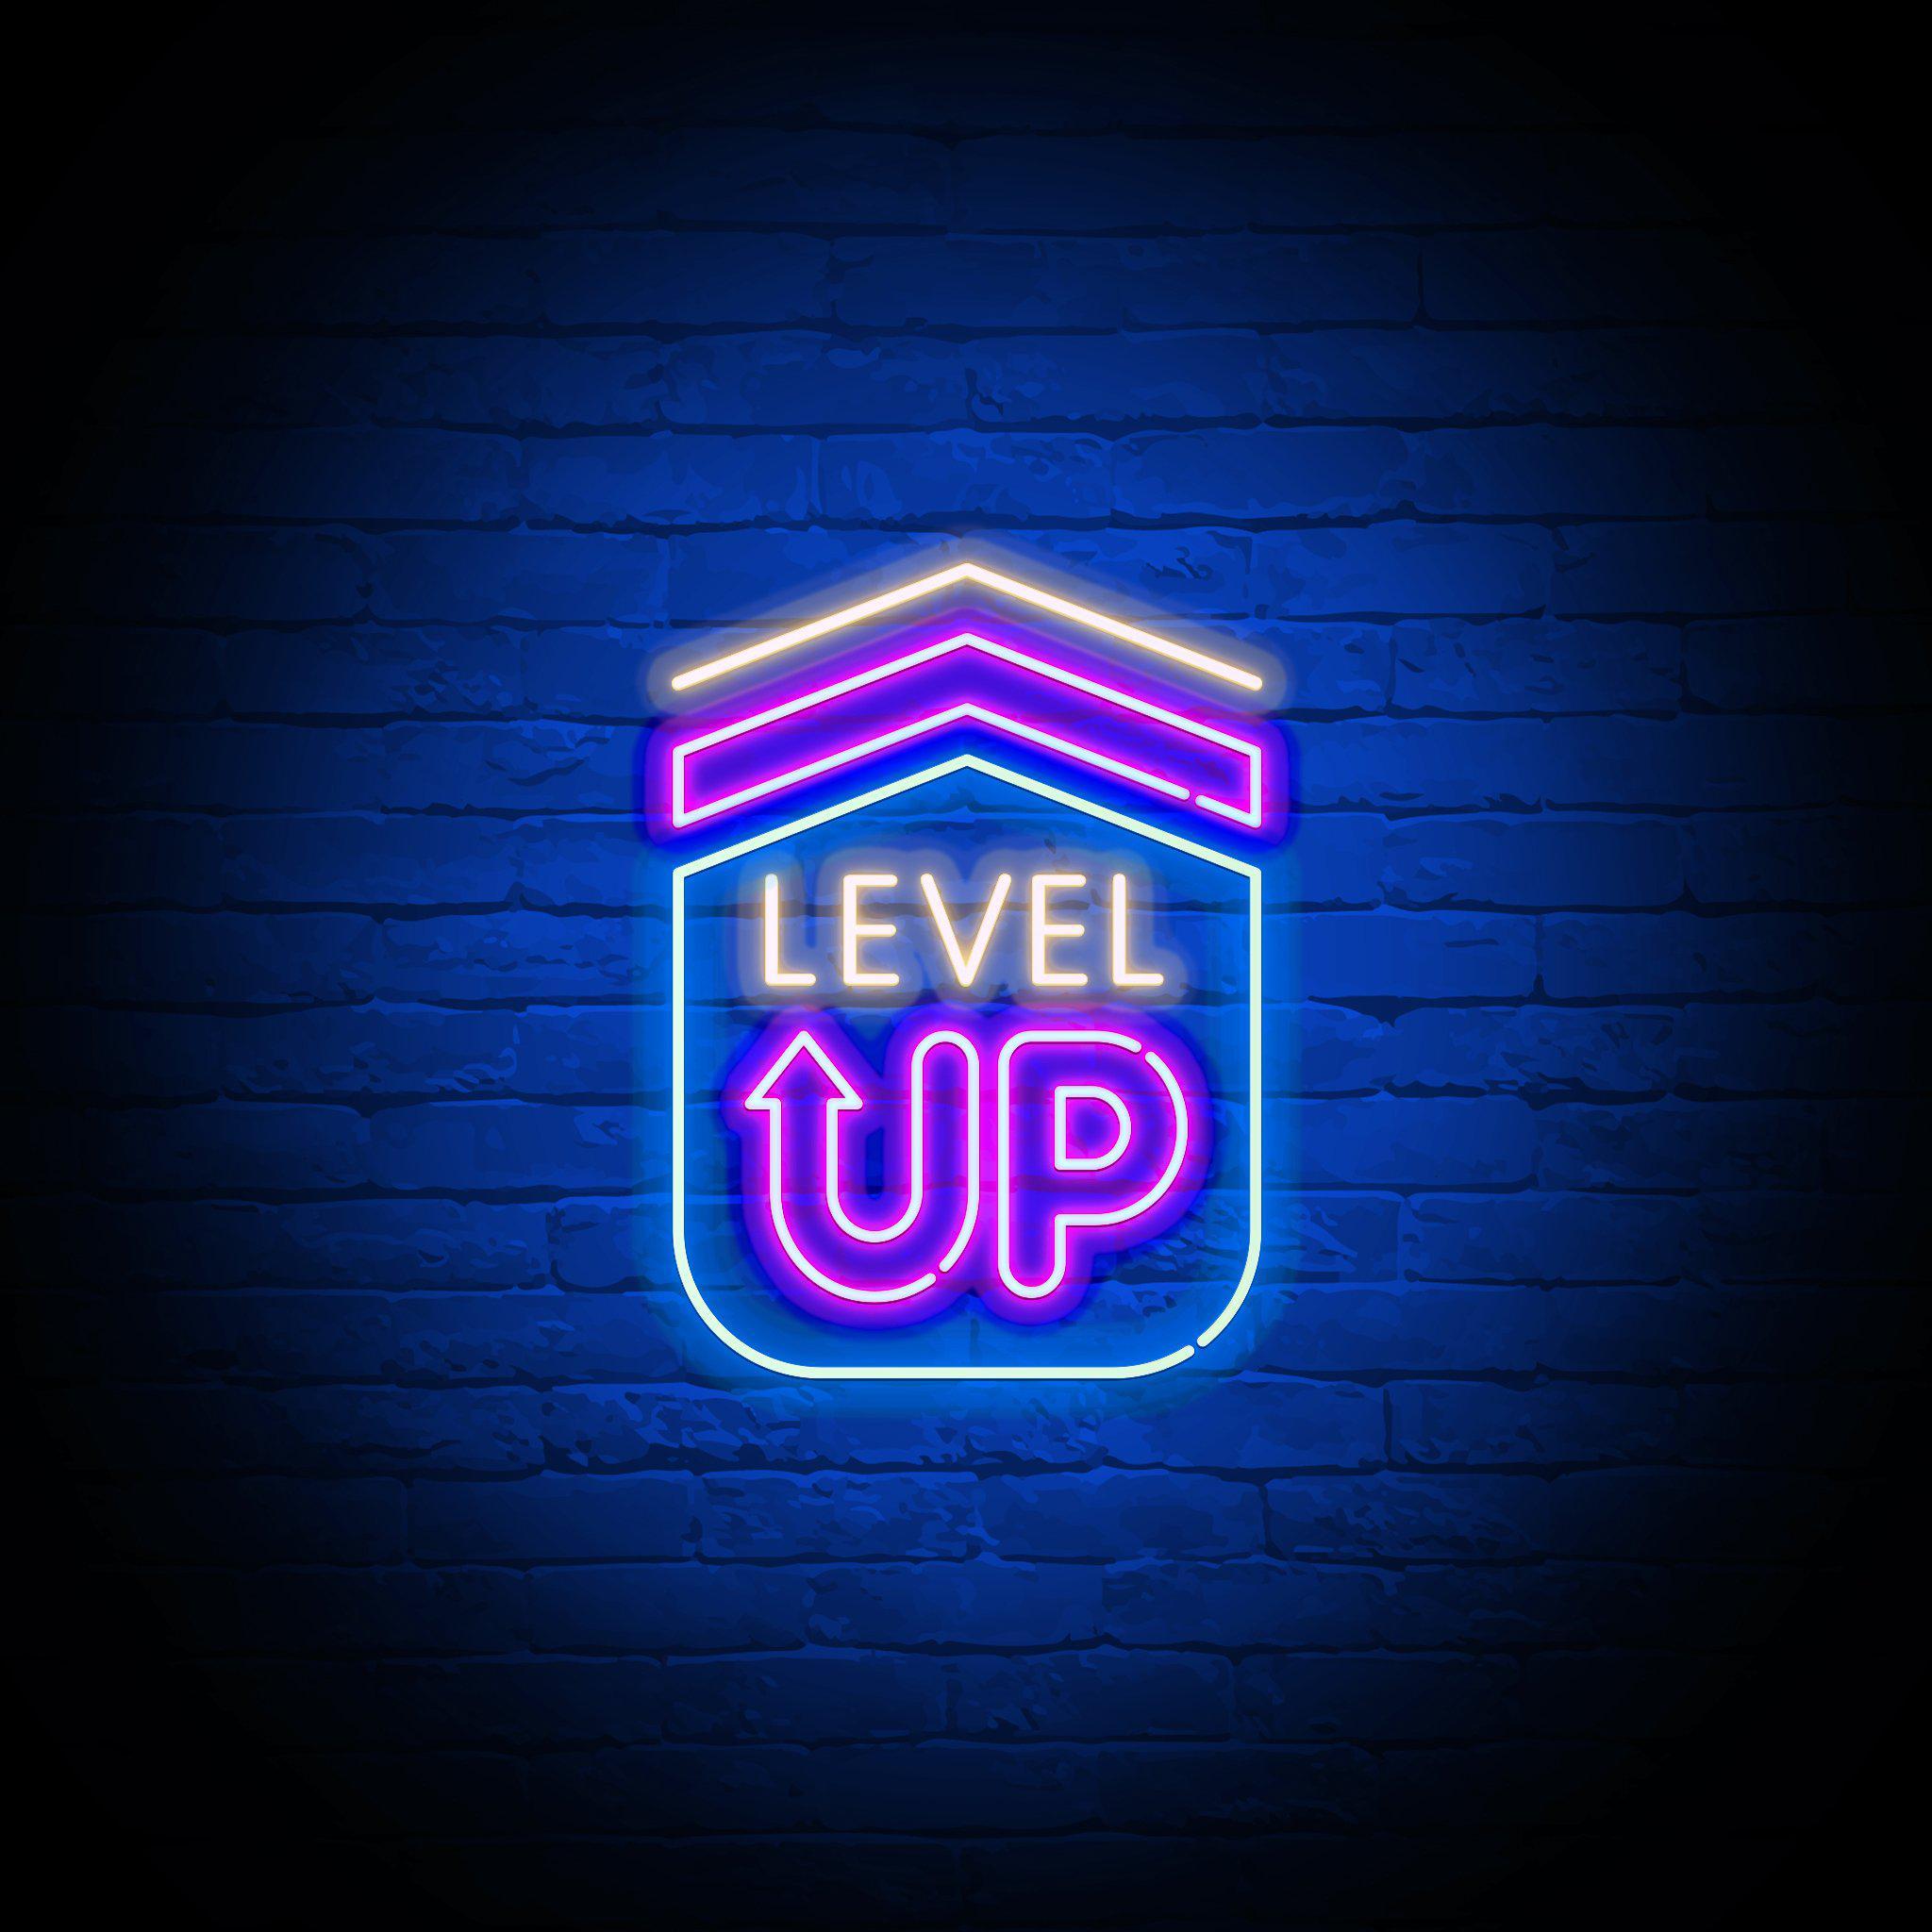 'LEVEL UP' NEON SIGN